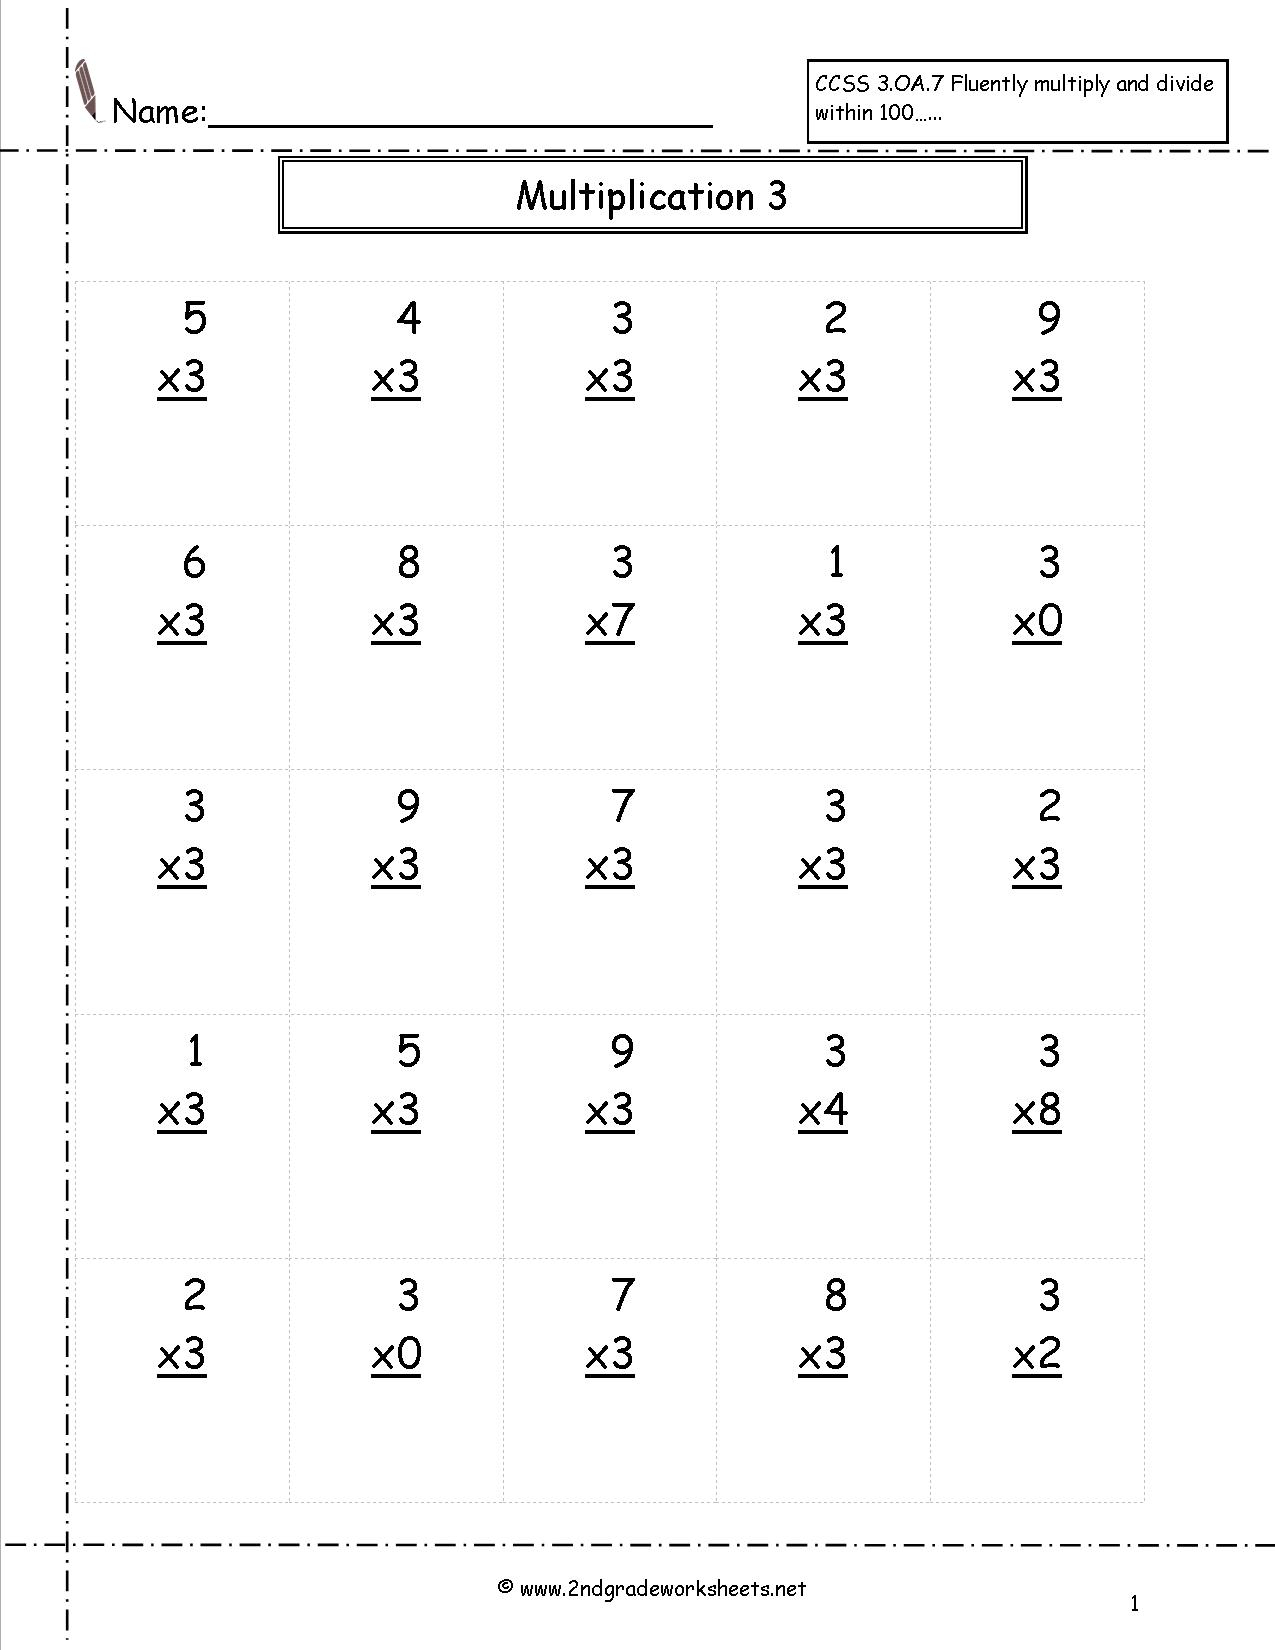 Multiplication Worksheets And Printouts throughout Multiplication Worksheets Number 3